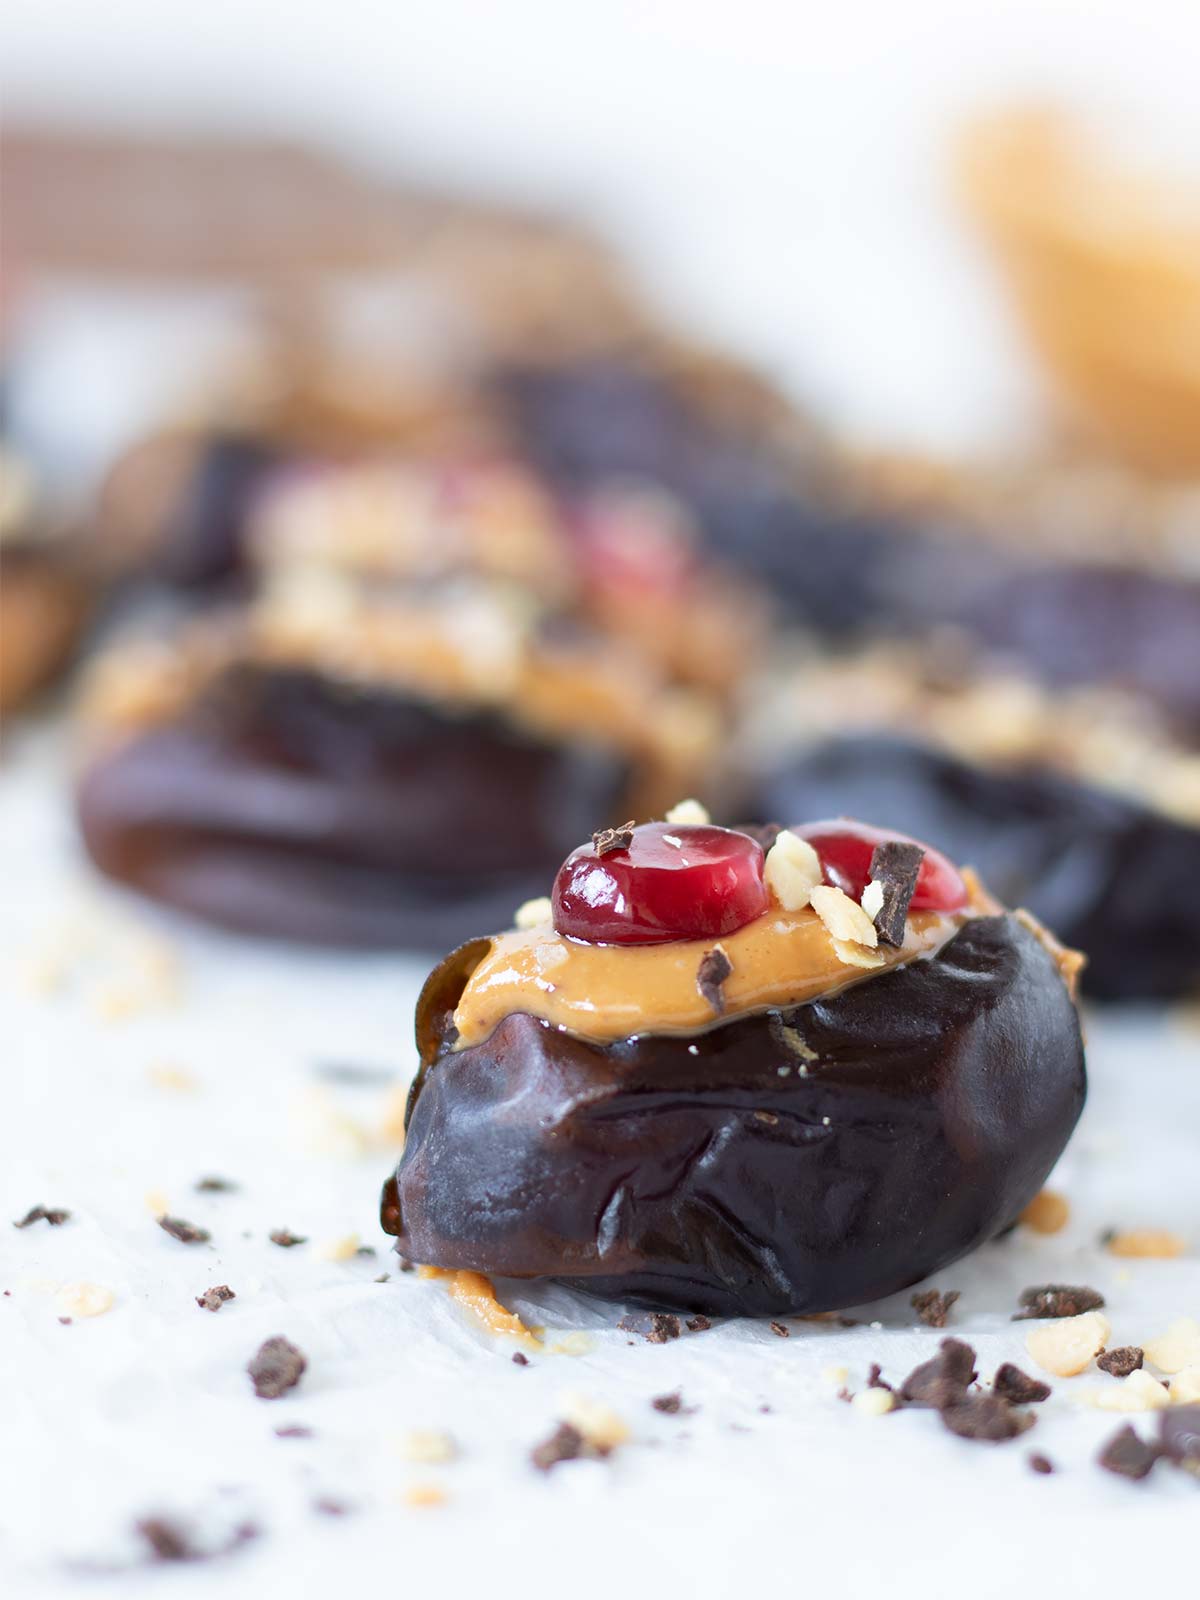 Peanut butter stuffed dates topped with dark chocolate and pomegranate seeds as an easy no-bake dessert or snack